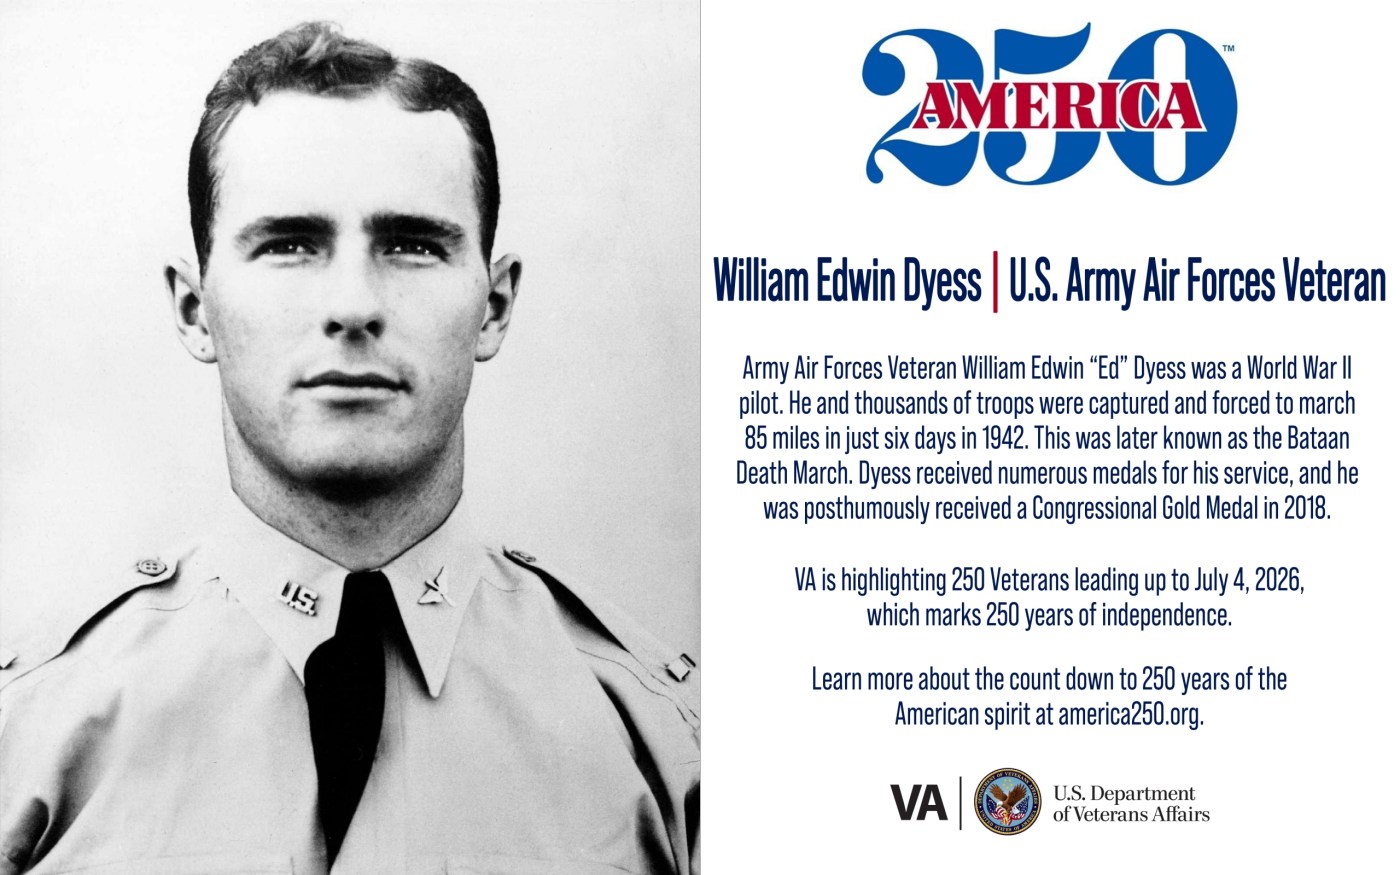 This week’s America250 salute is Army Air Forces Veteran William Edwin “Ed” Dyess, who survived the Bataan Death March and led an escape.